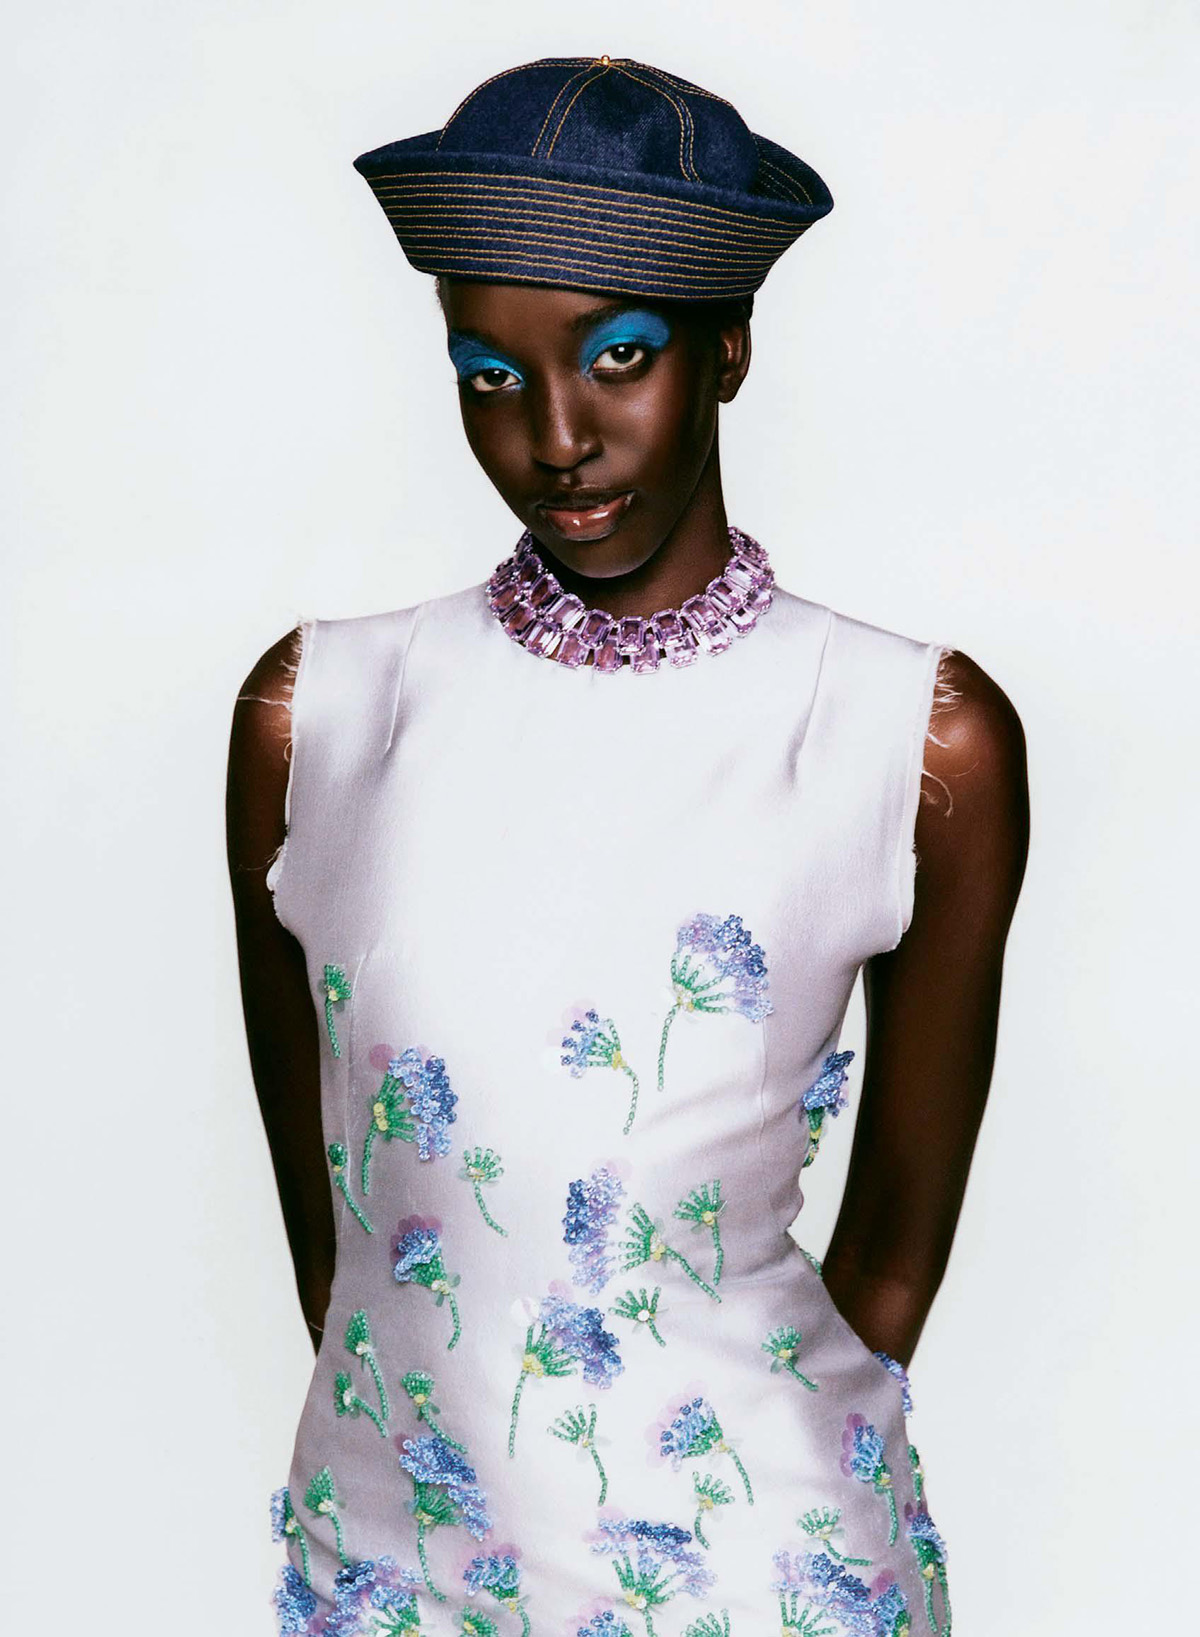 Nyaueth Riam by Santi de Hita for The Sunday Times Style March 13th, 2022